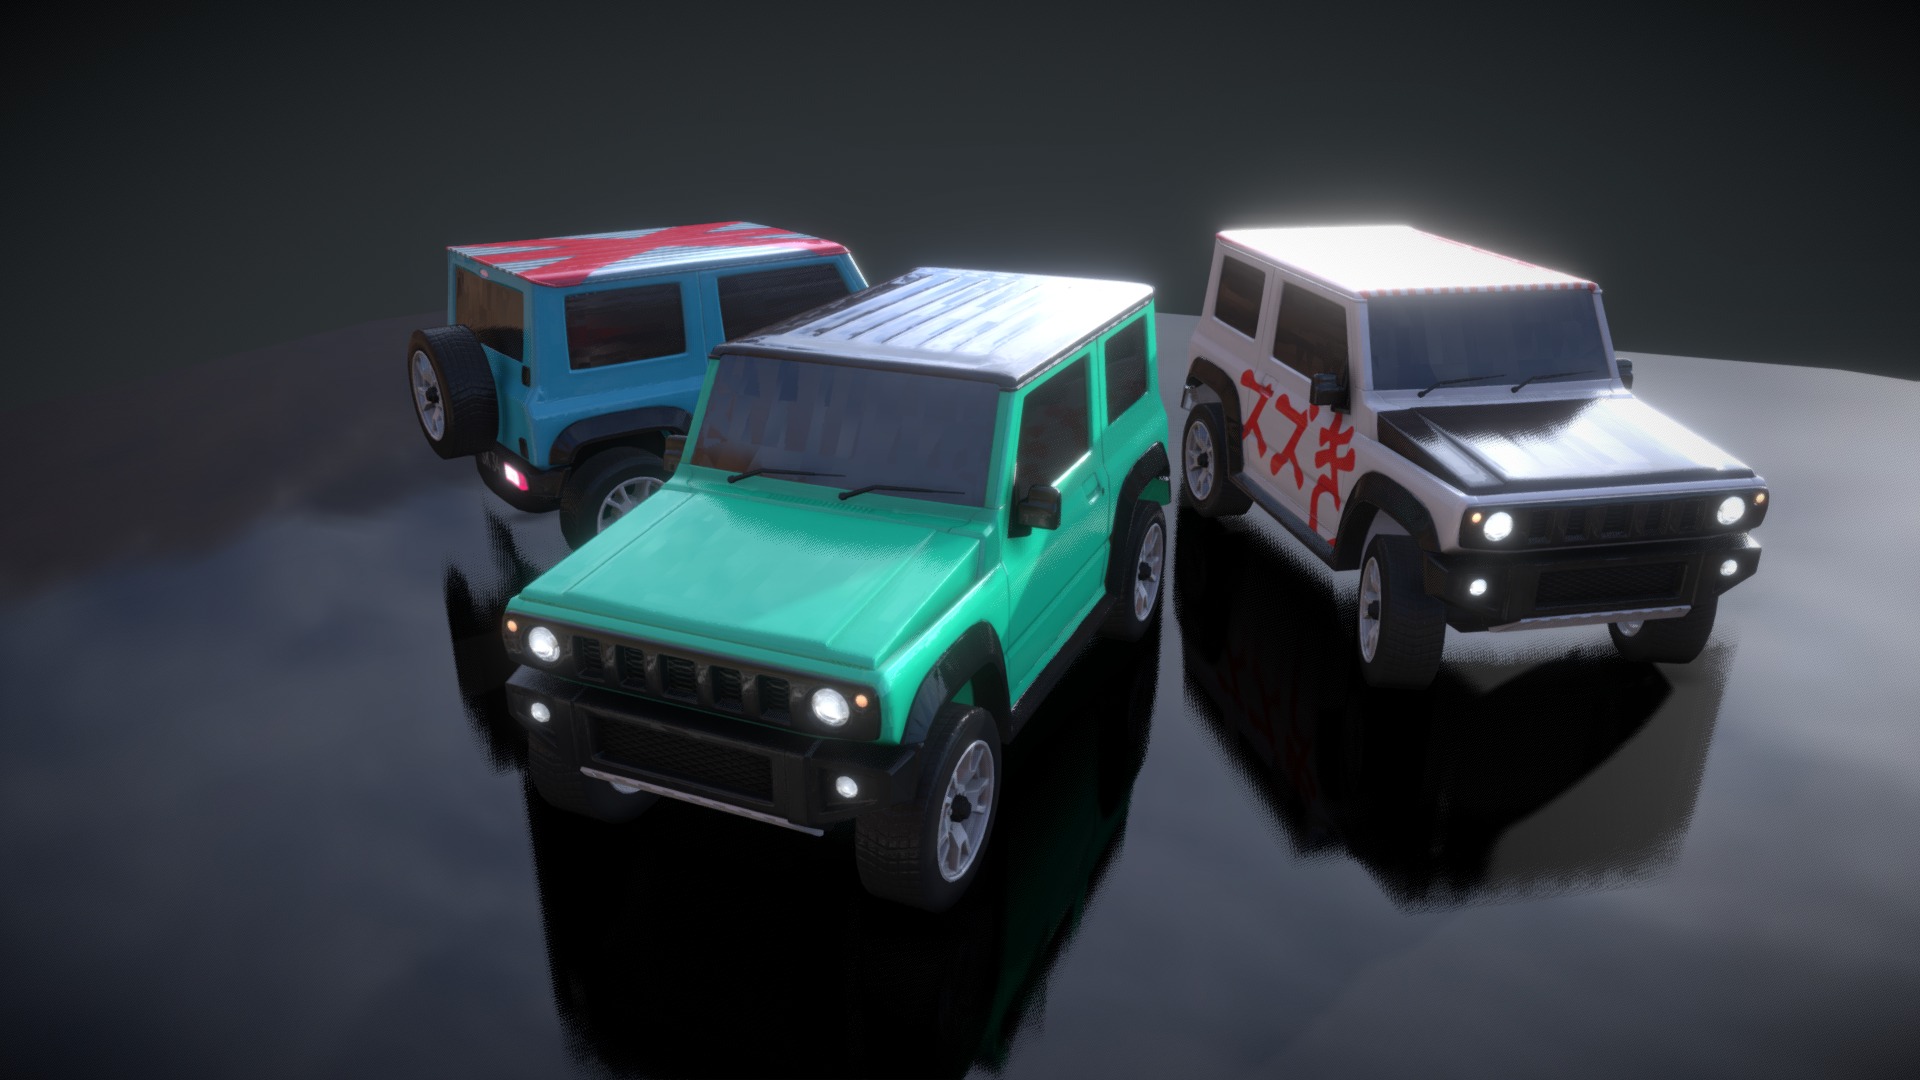 3D model Suzuki Jimny 2019 - This is a 3D model of the Suzuki Jimny 2019. The 3D model is about toy trucks on a surface.